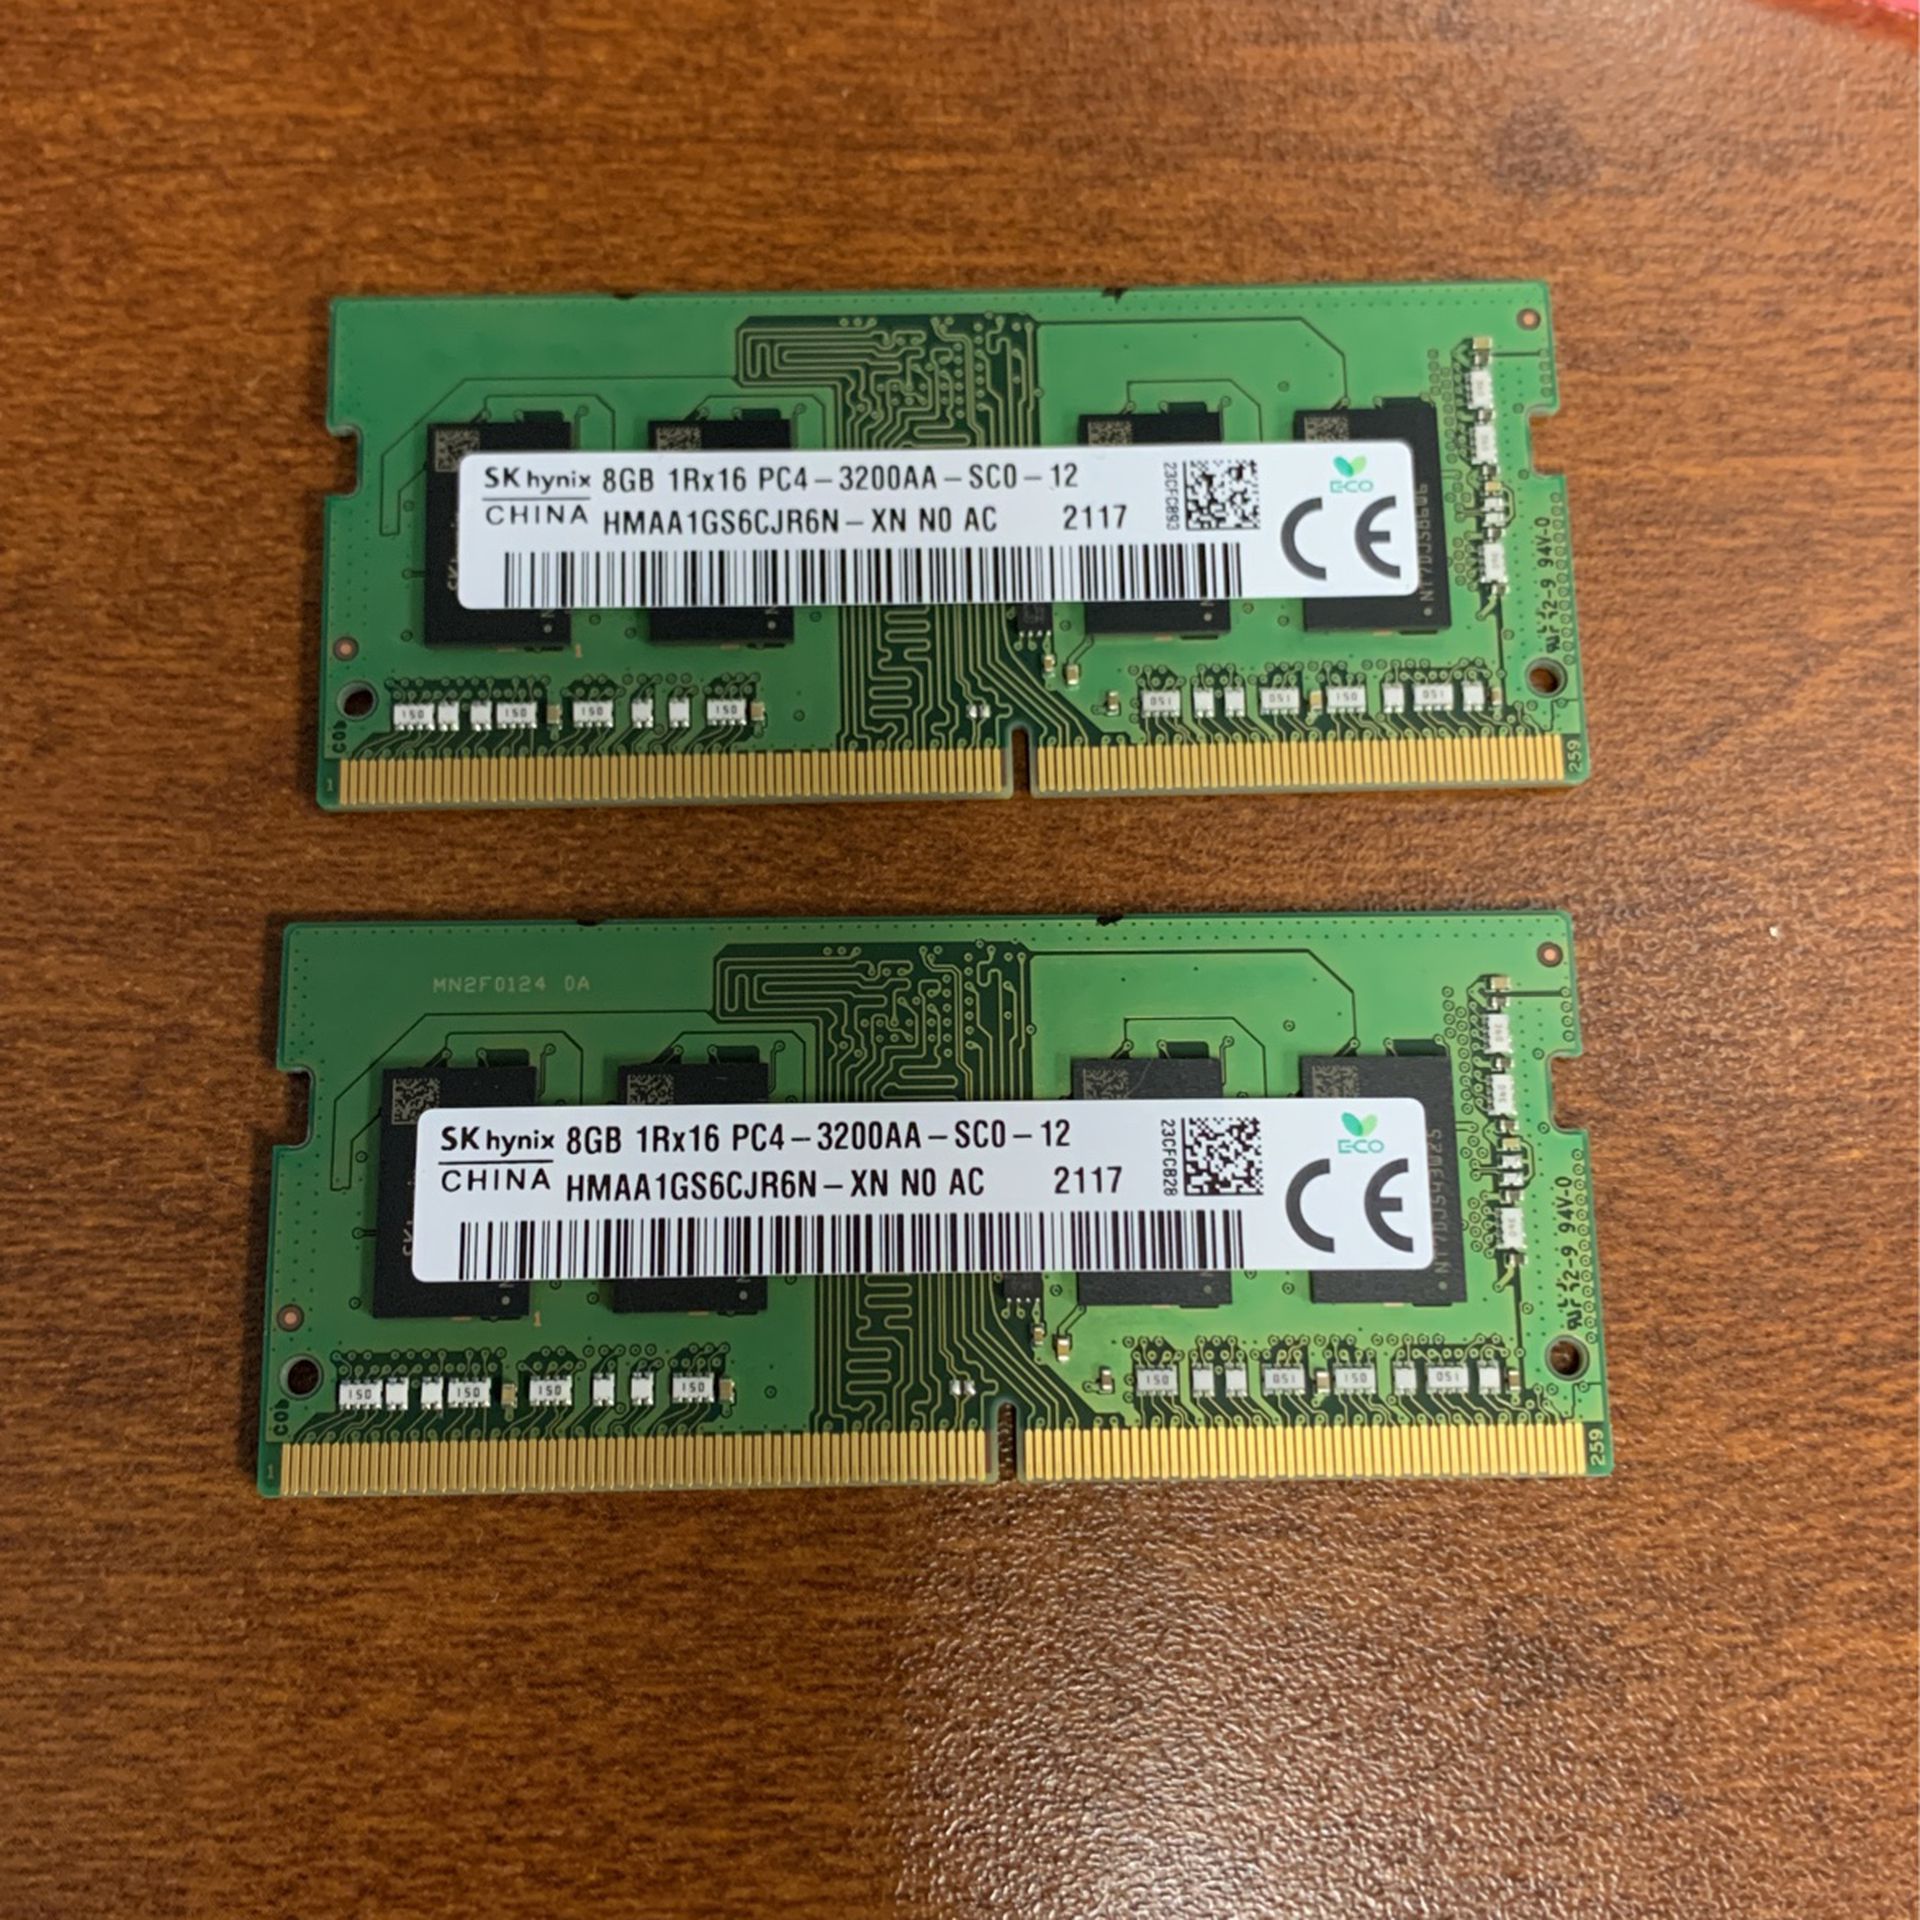 16GB 2x8 DDR4 3200 RAM / Memory For Laptop for Tacoma, WA - OfferUp